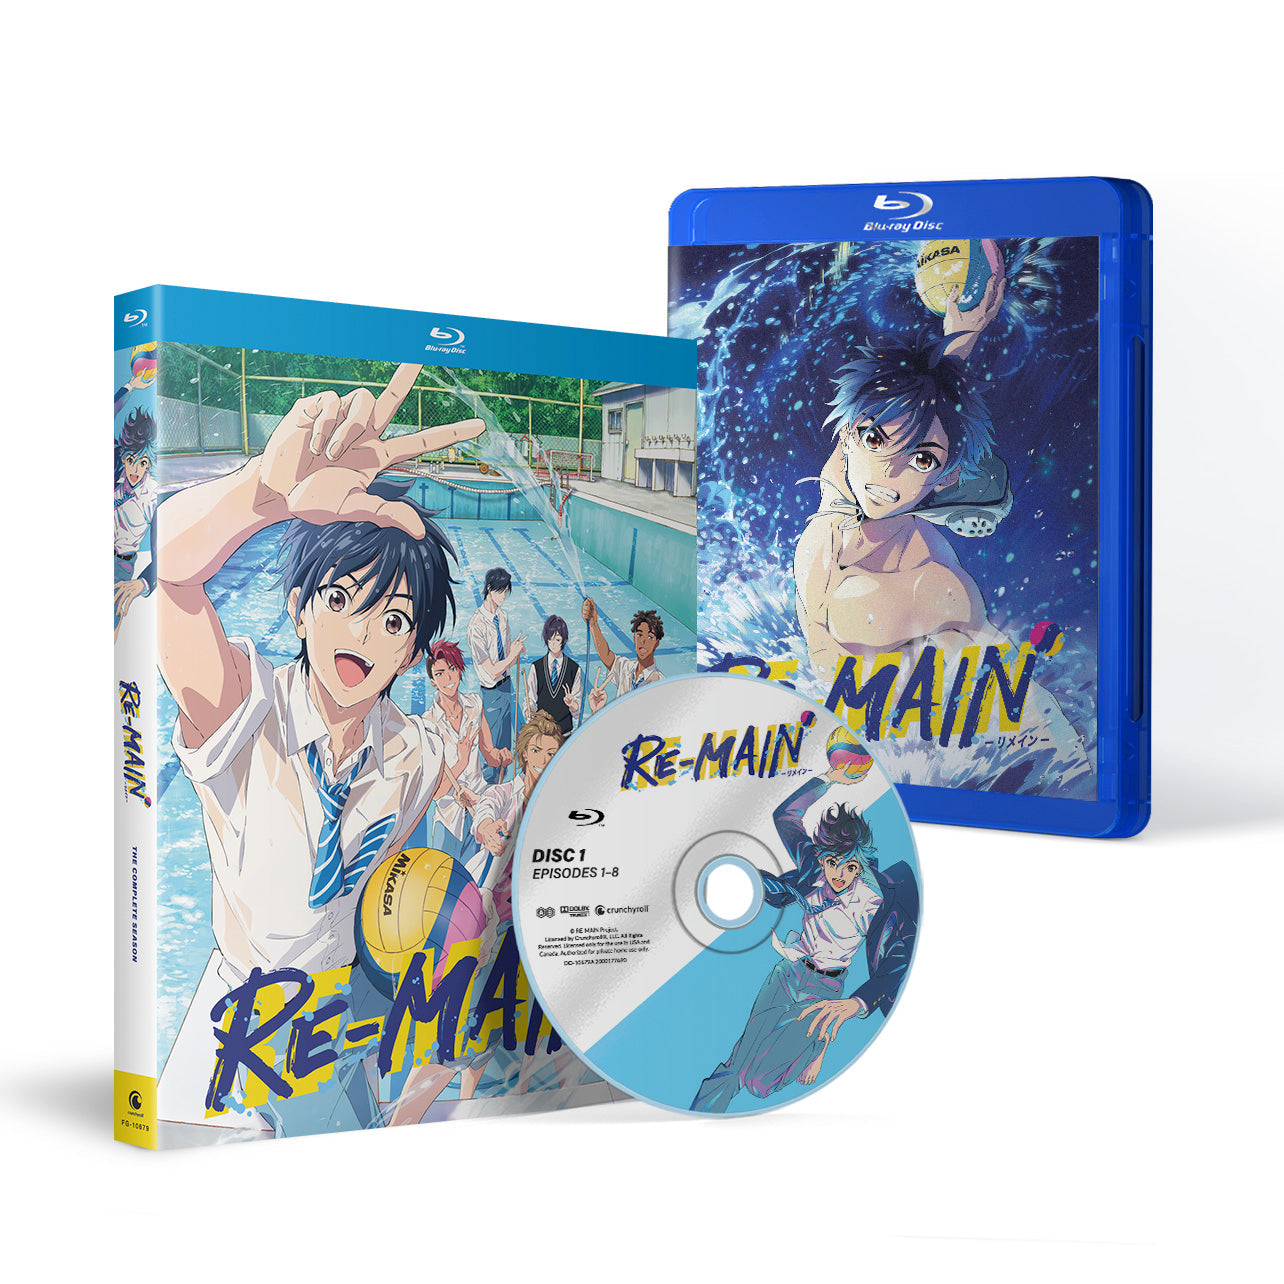 4K Blu Ray collection & Upcoming Releases discussion thread | Anime UK News  Forums